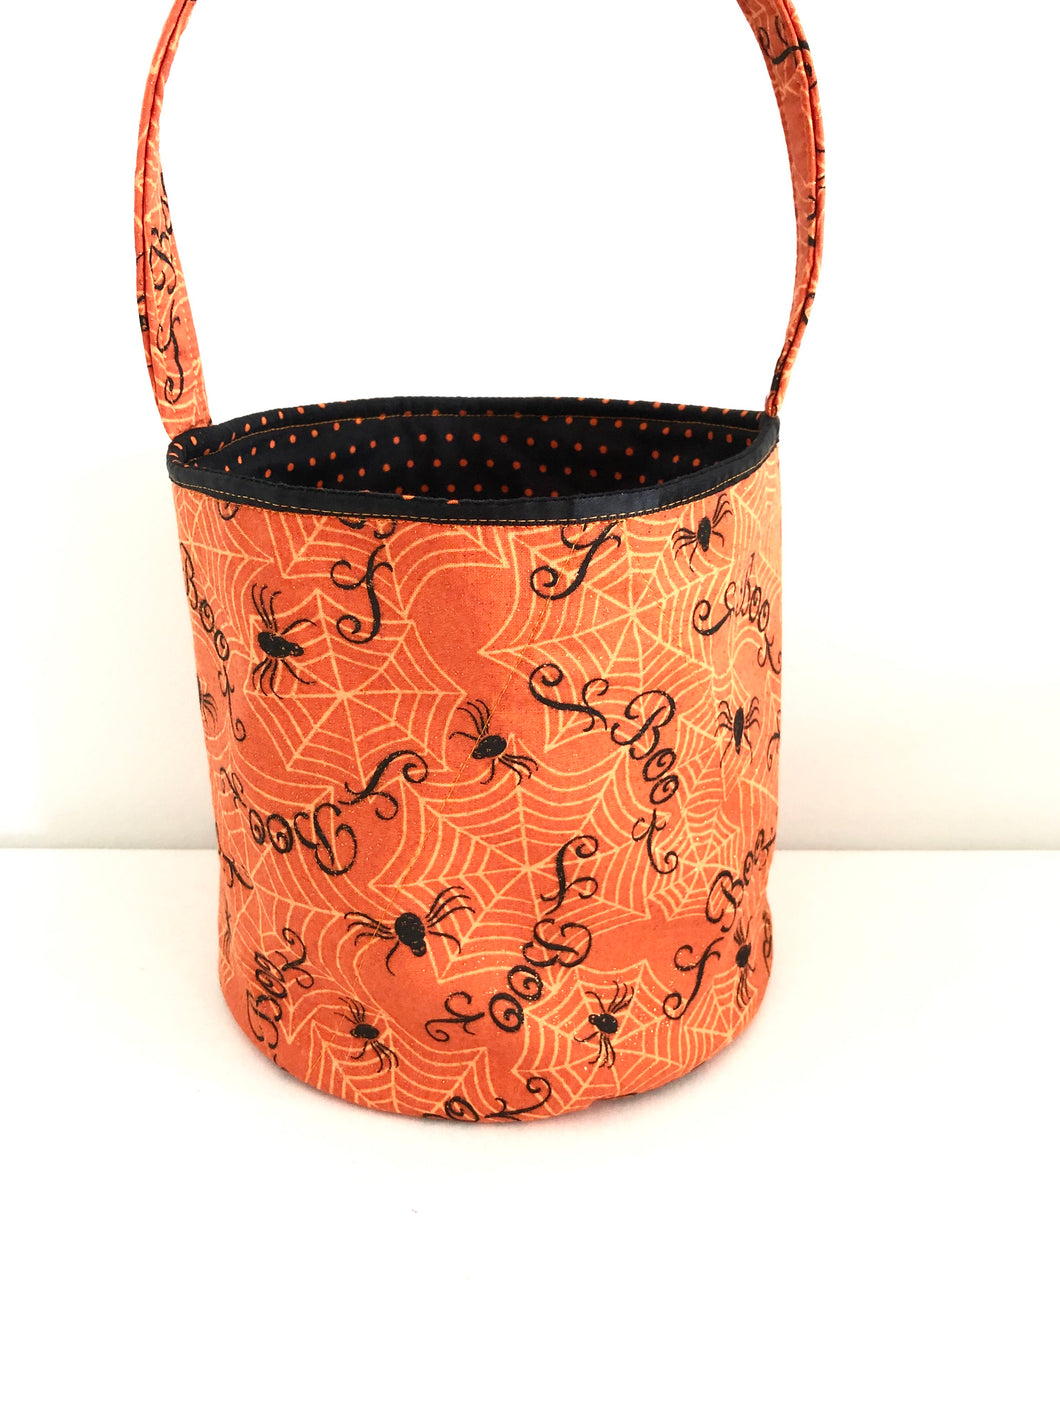 Spider spooky Halloween handbags; Trick-Or-Treat Bags Hallowen bags Candy bags Candy tote for kids